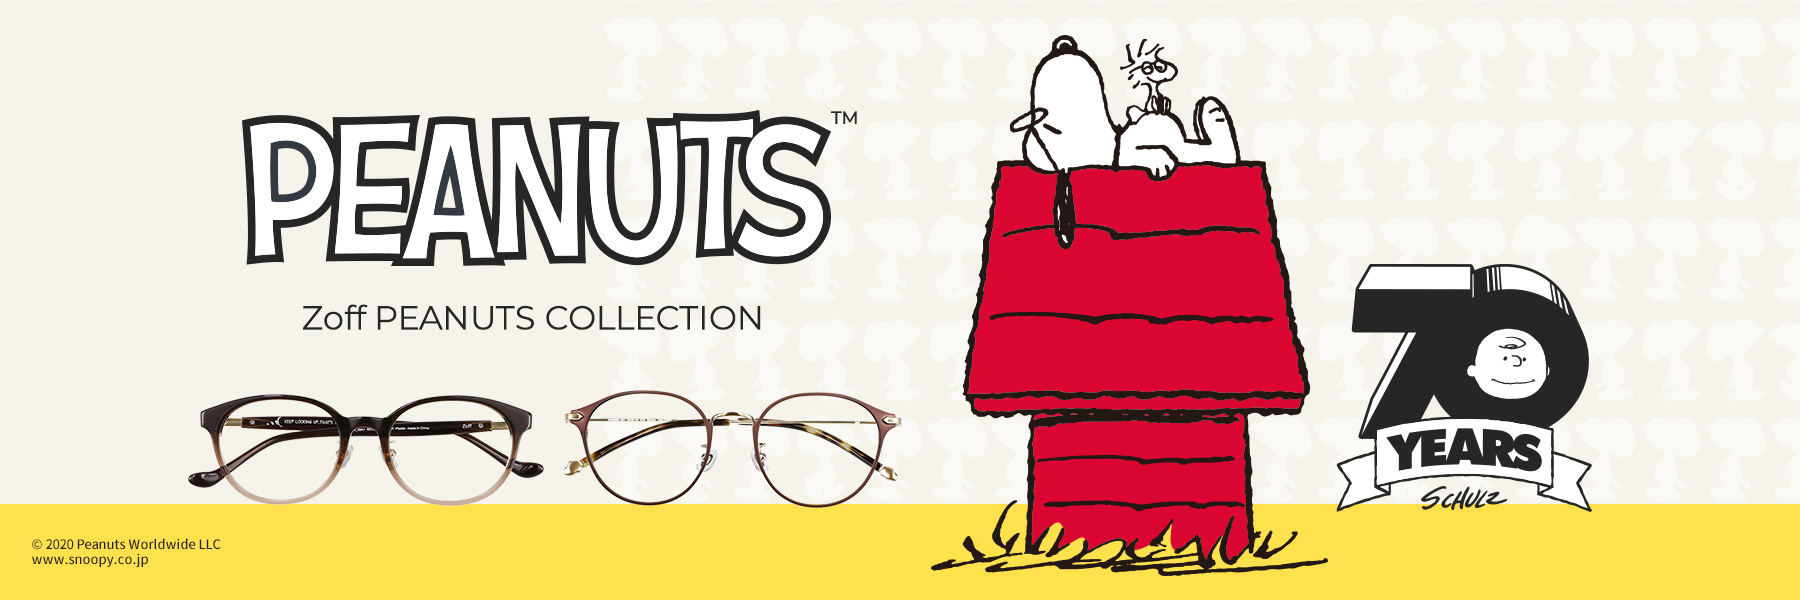 Zoff PEANUTS Collection